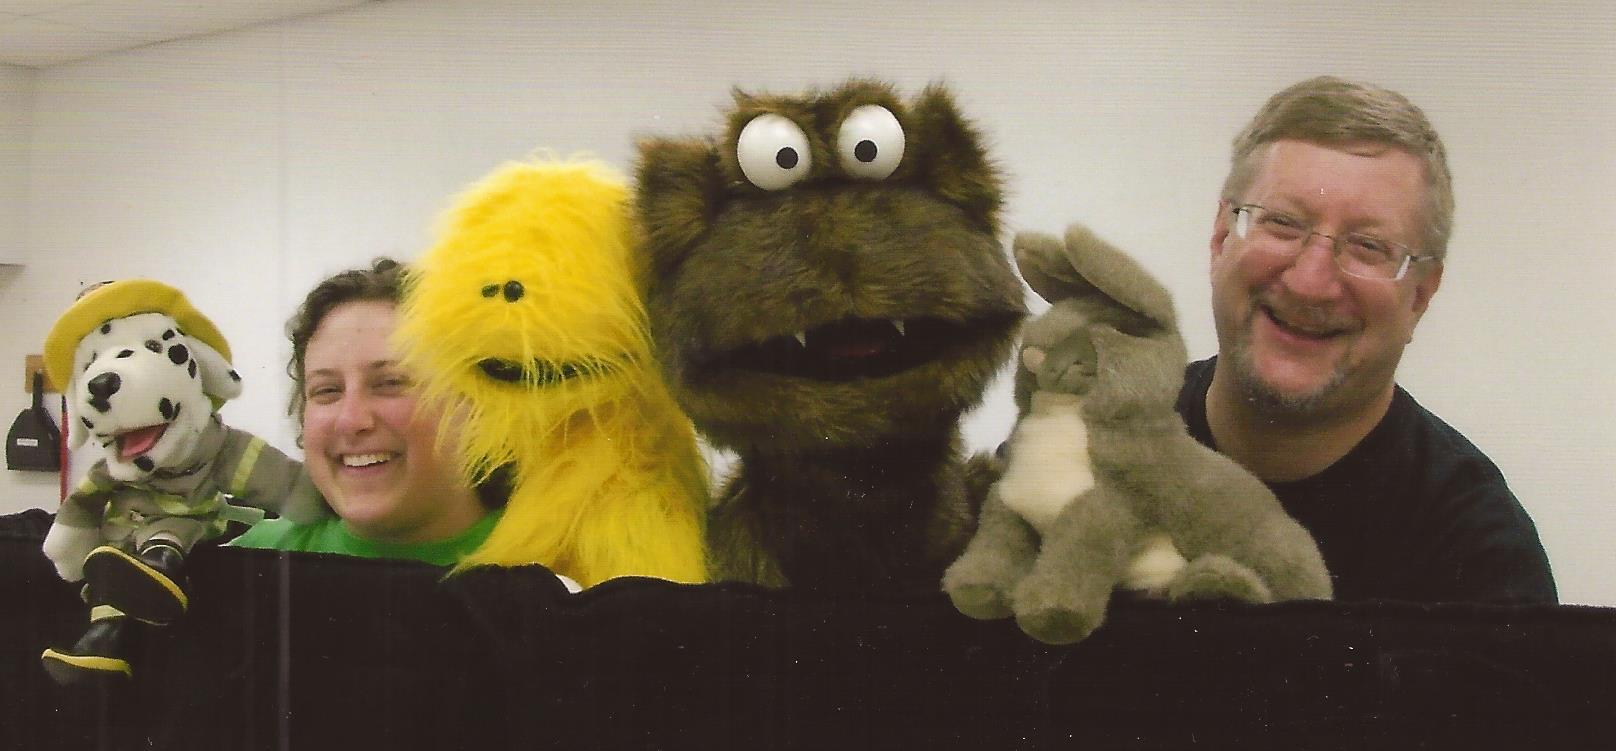 Miss Cassie and Mr. Dave with monster puppet friends